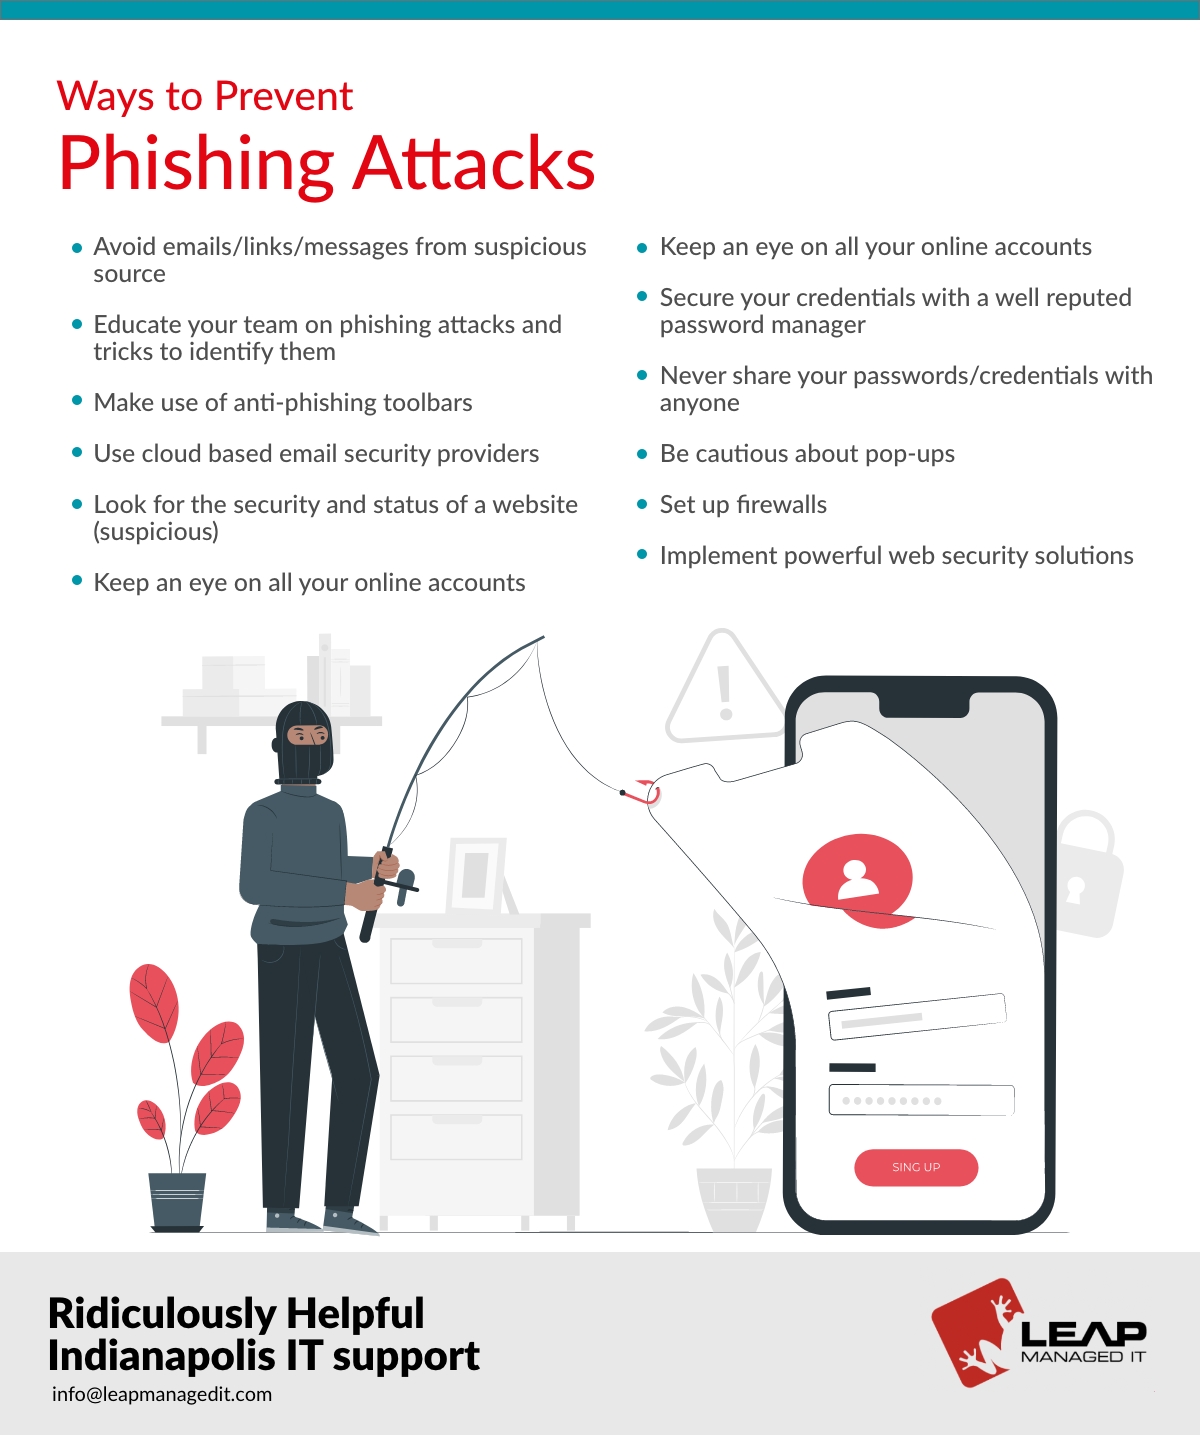 Ways to Prevent Phishing Attacks - Leap managed IT